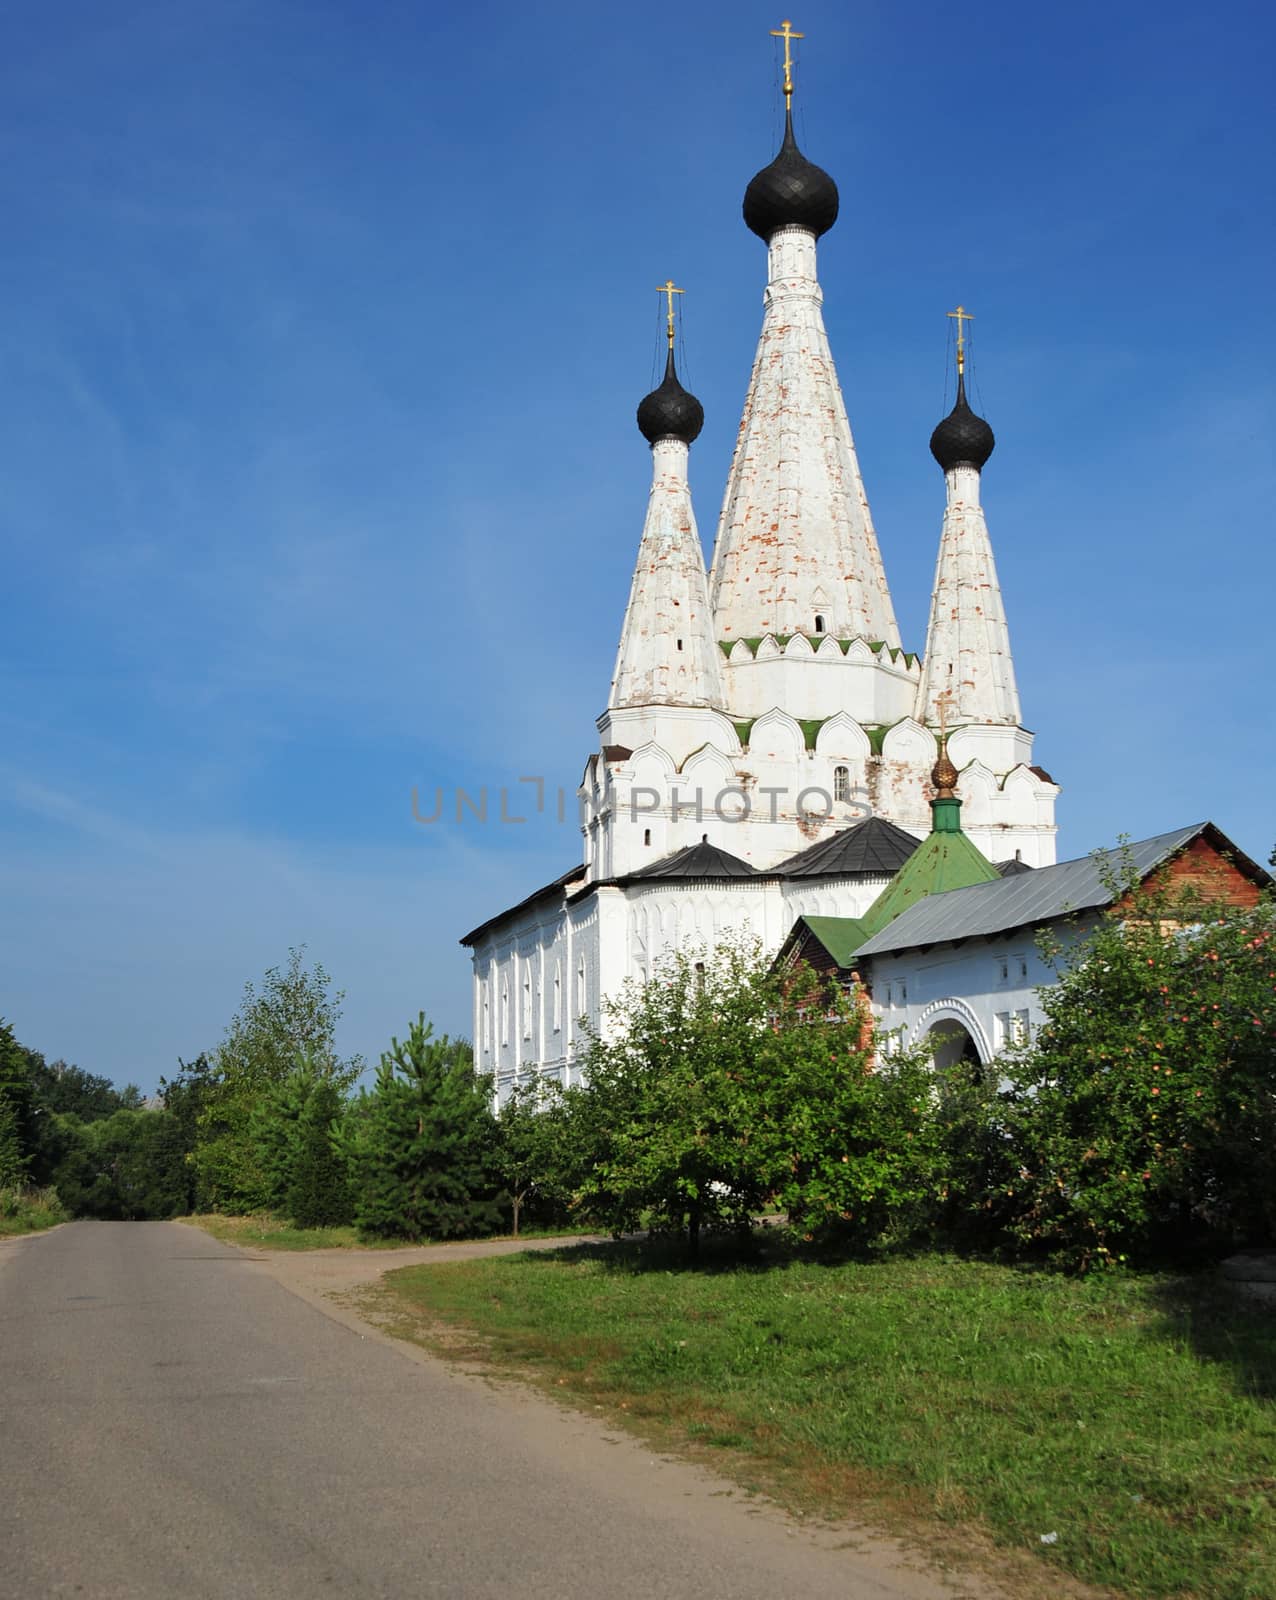 Orthodox Alekseyevsky convent in Uglich on a summer day.